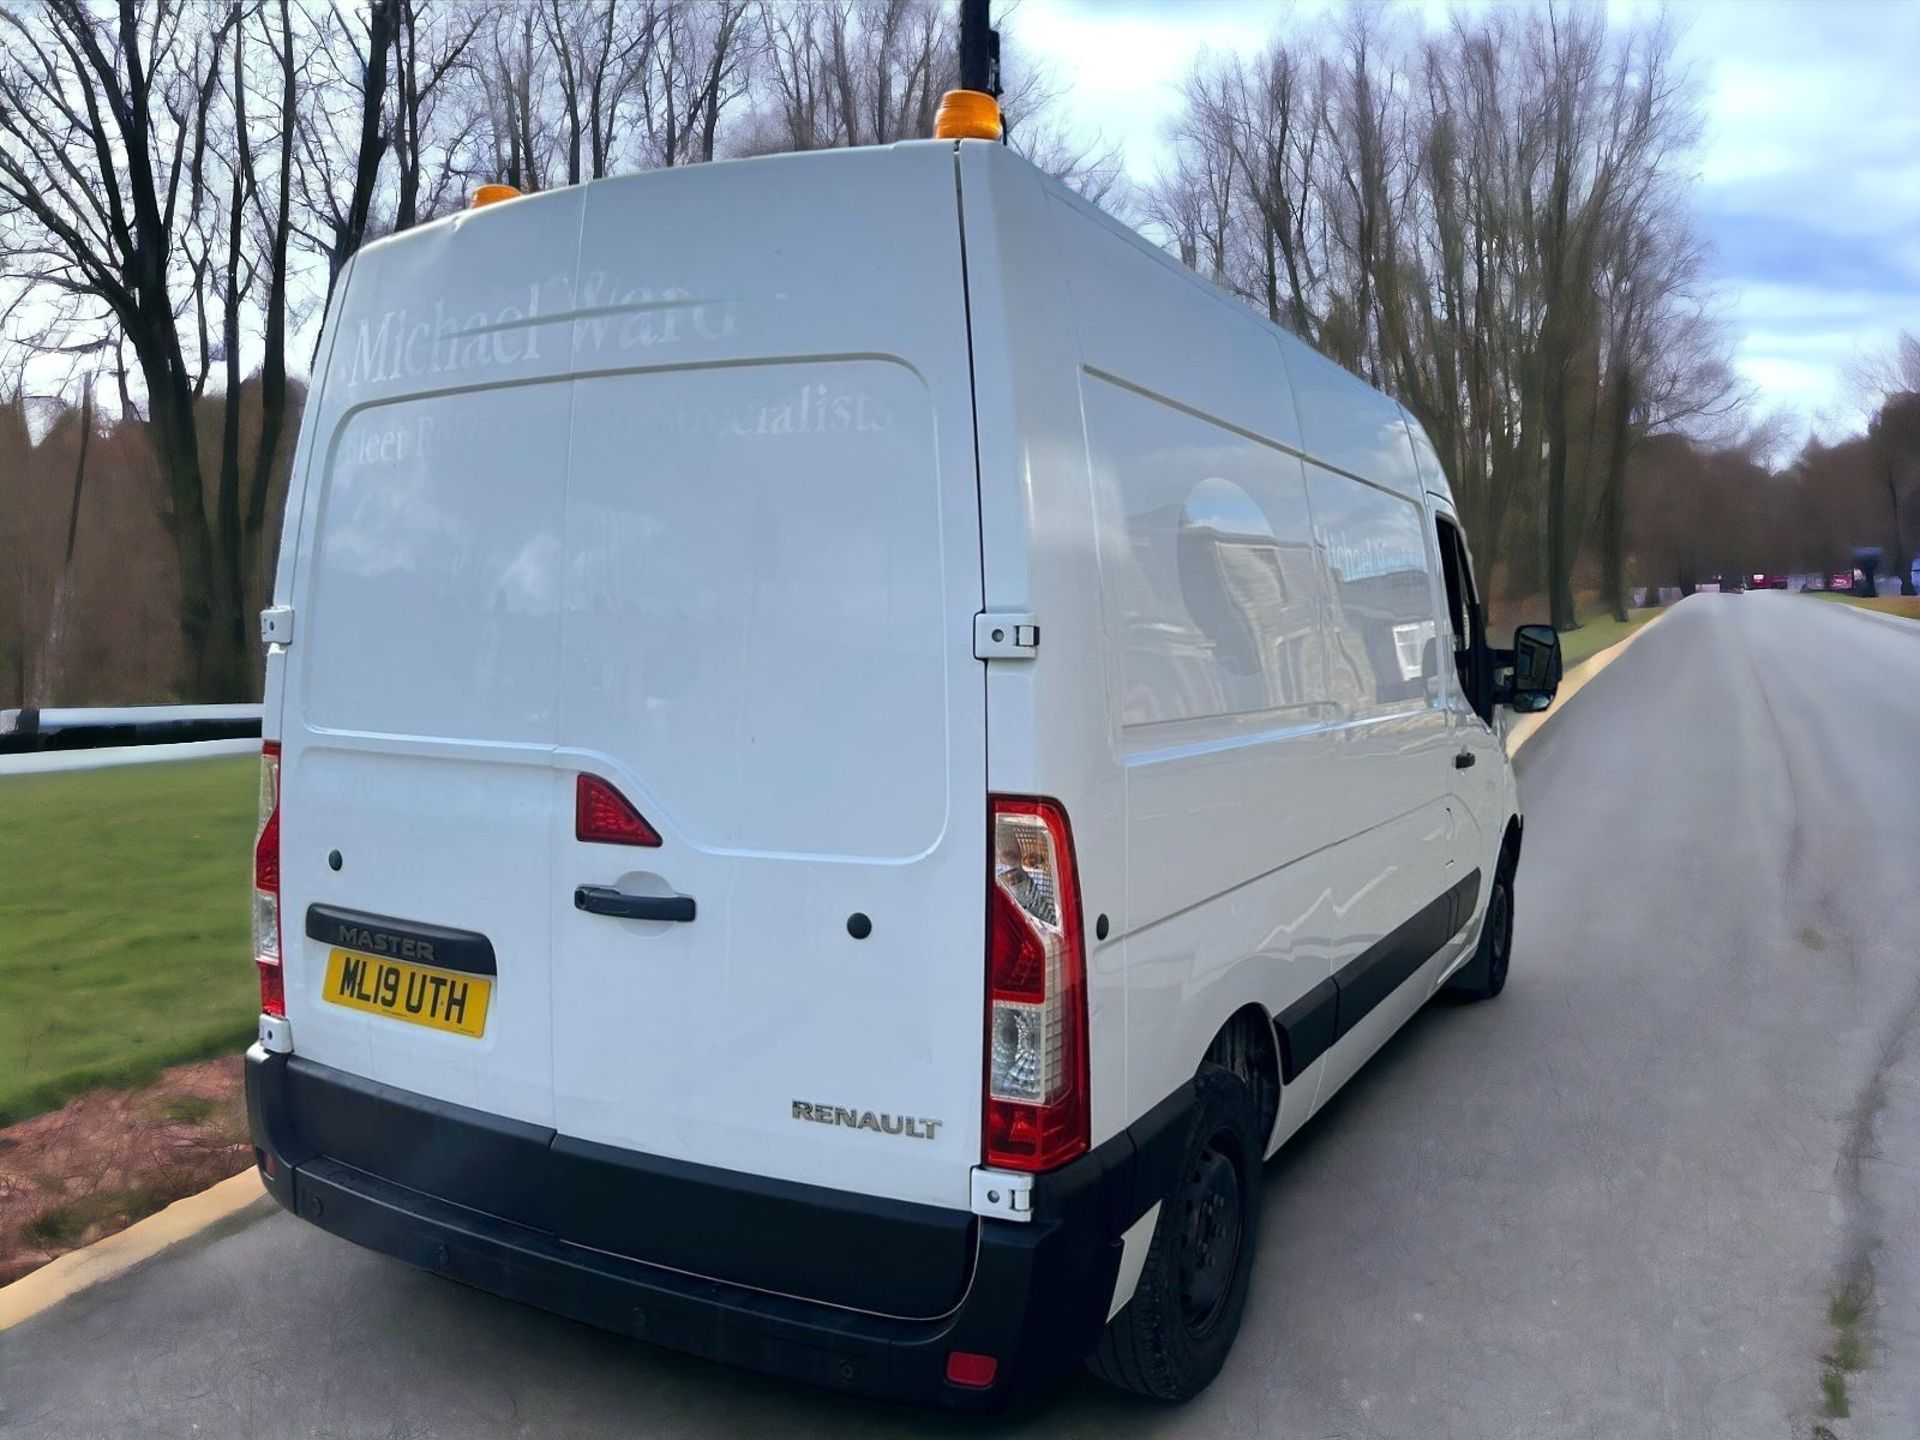 2019-19 REG RENAULT MASTER DCI MWB35 L2H2 -HPI CLEAR - READY FOR WORK! - Image 5 of 14